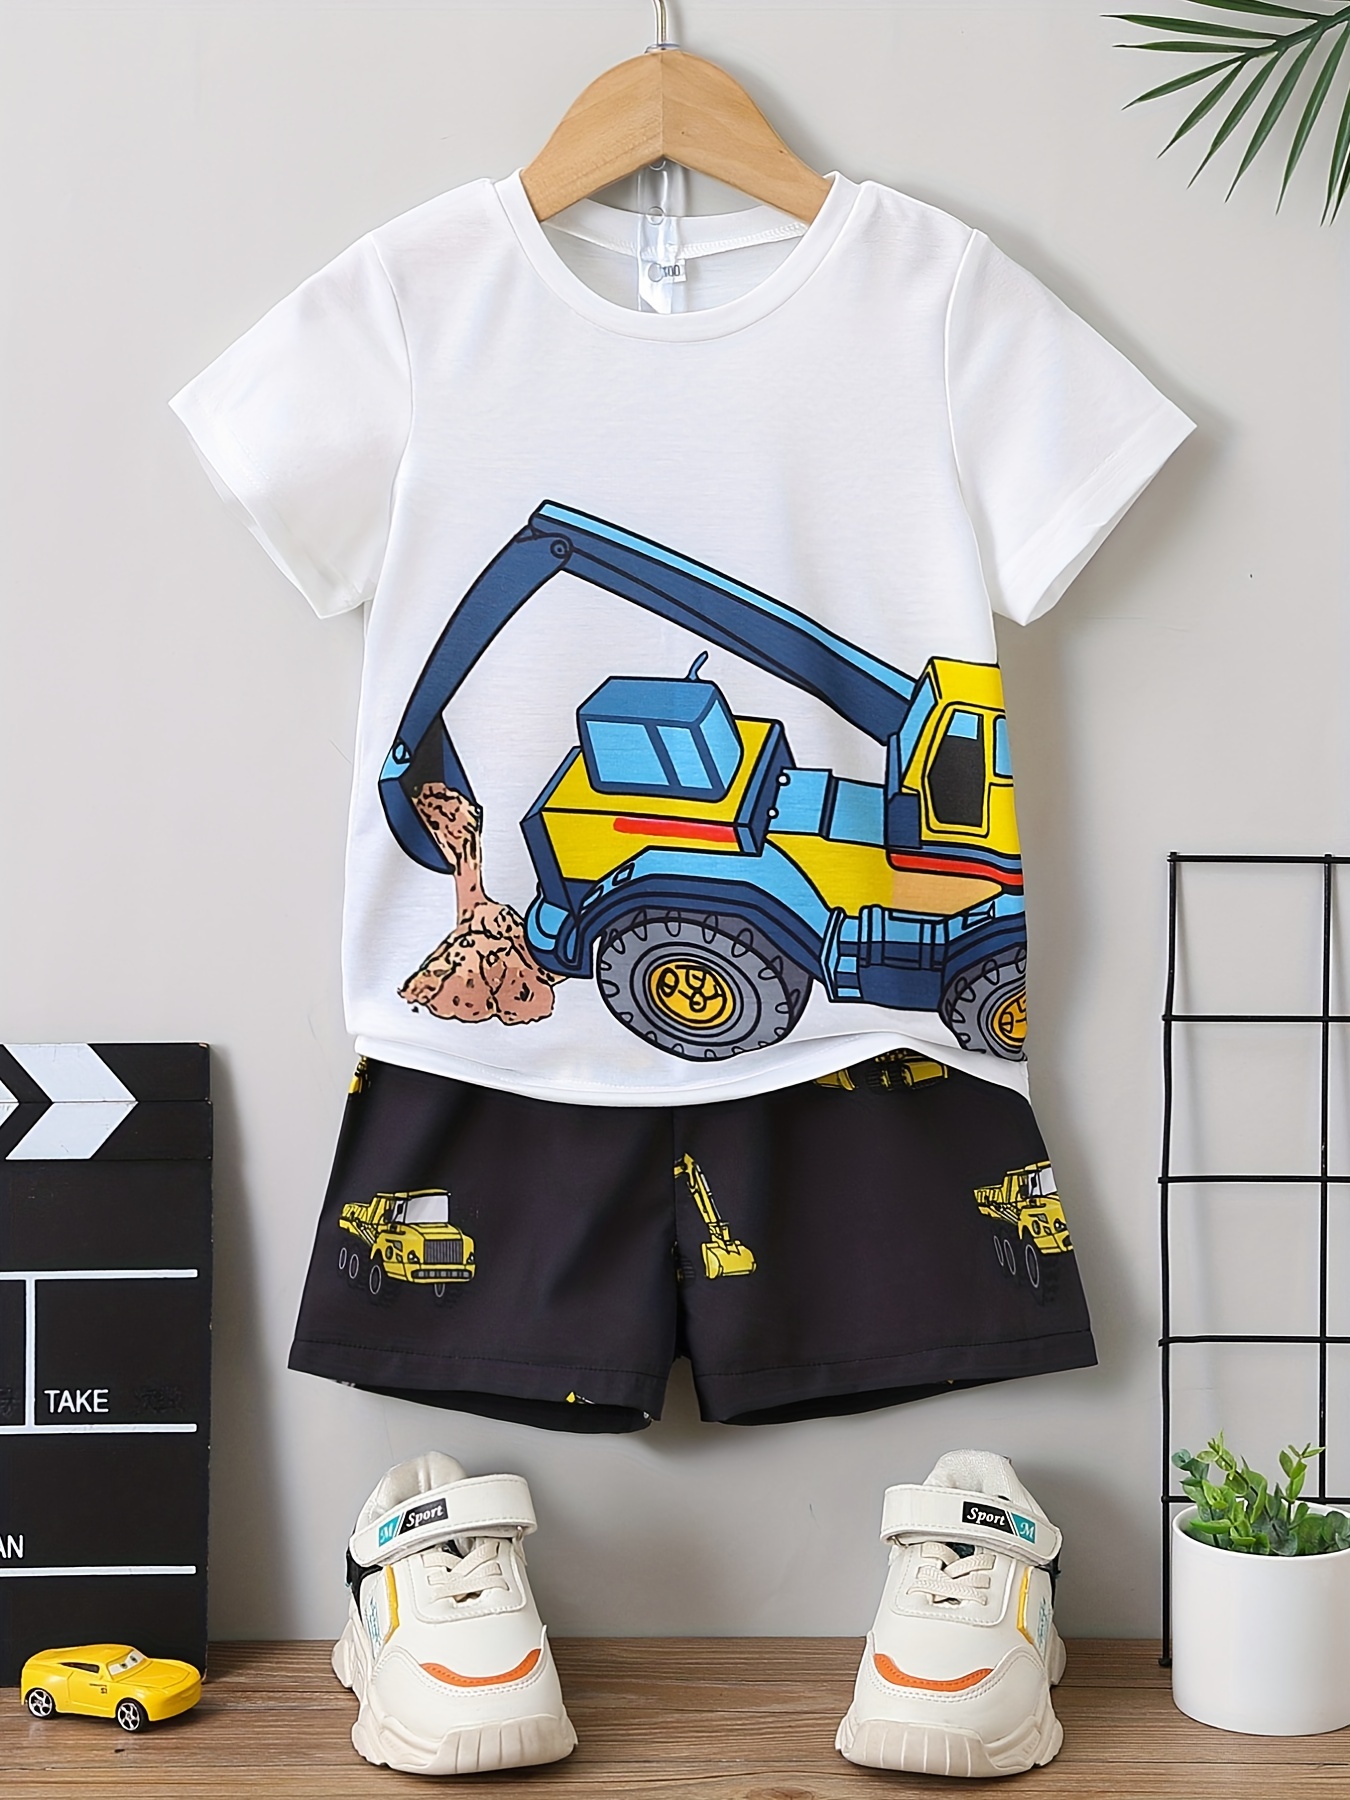 Boys Summer Clothing Sets Short Sleeve Sport Suits Casual O-neck